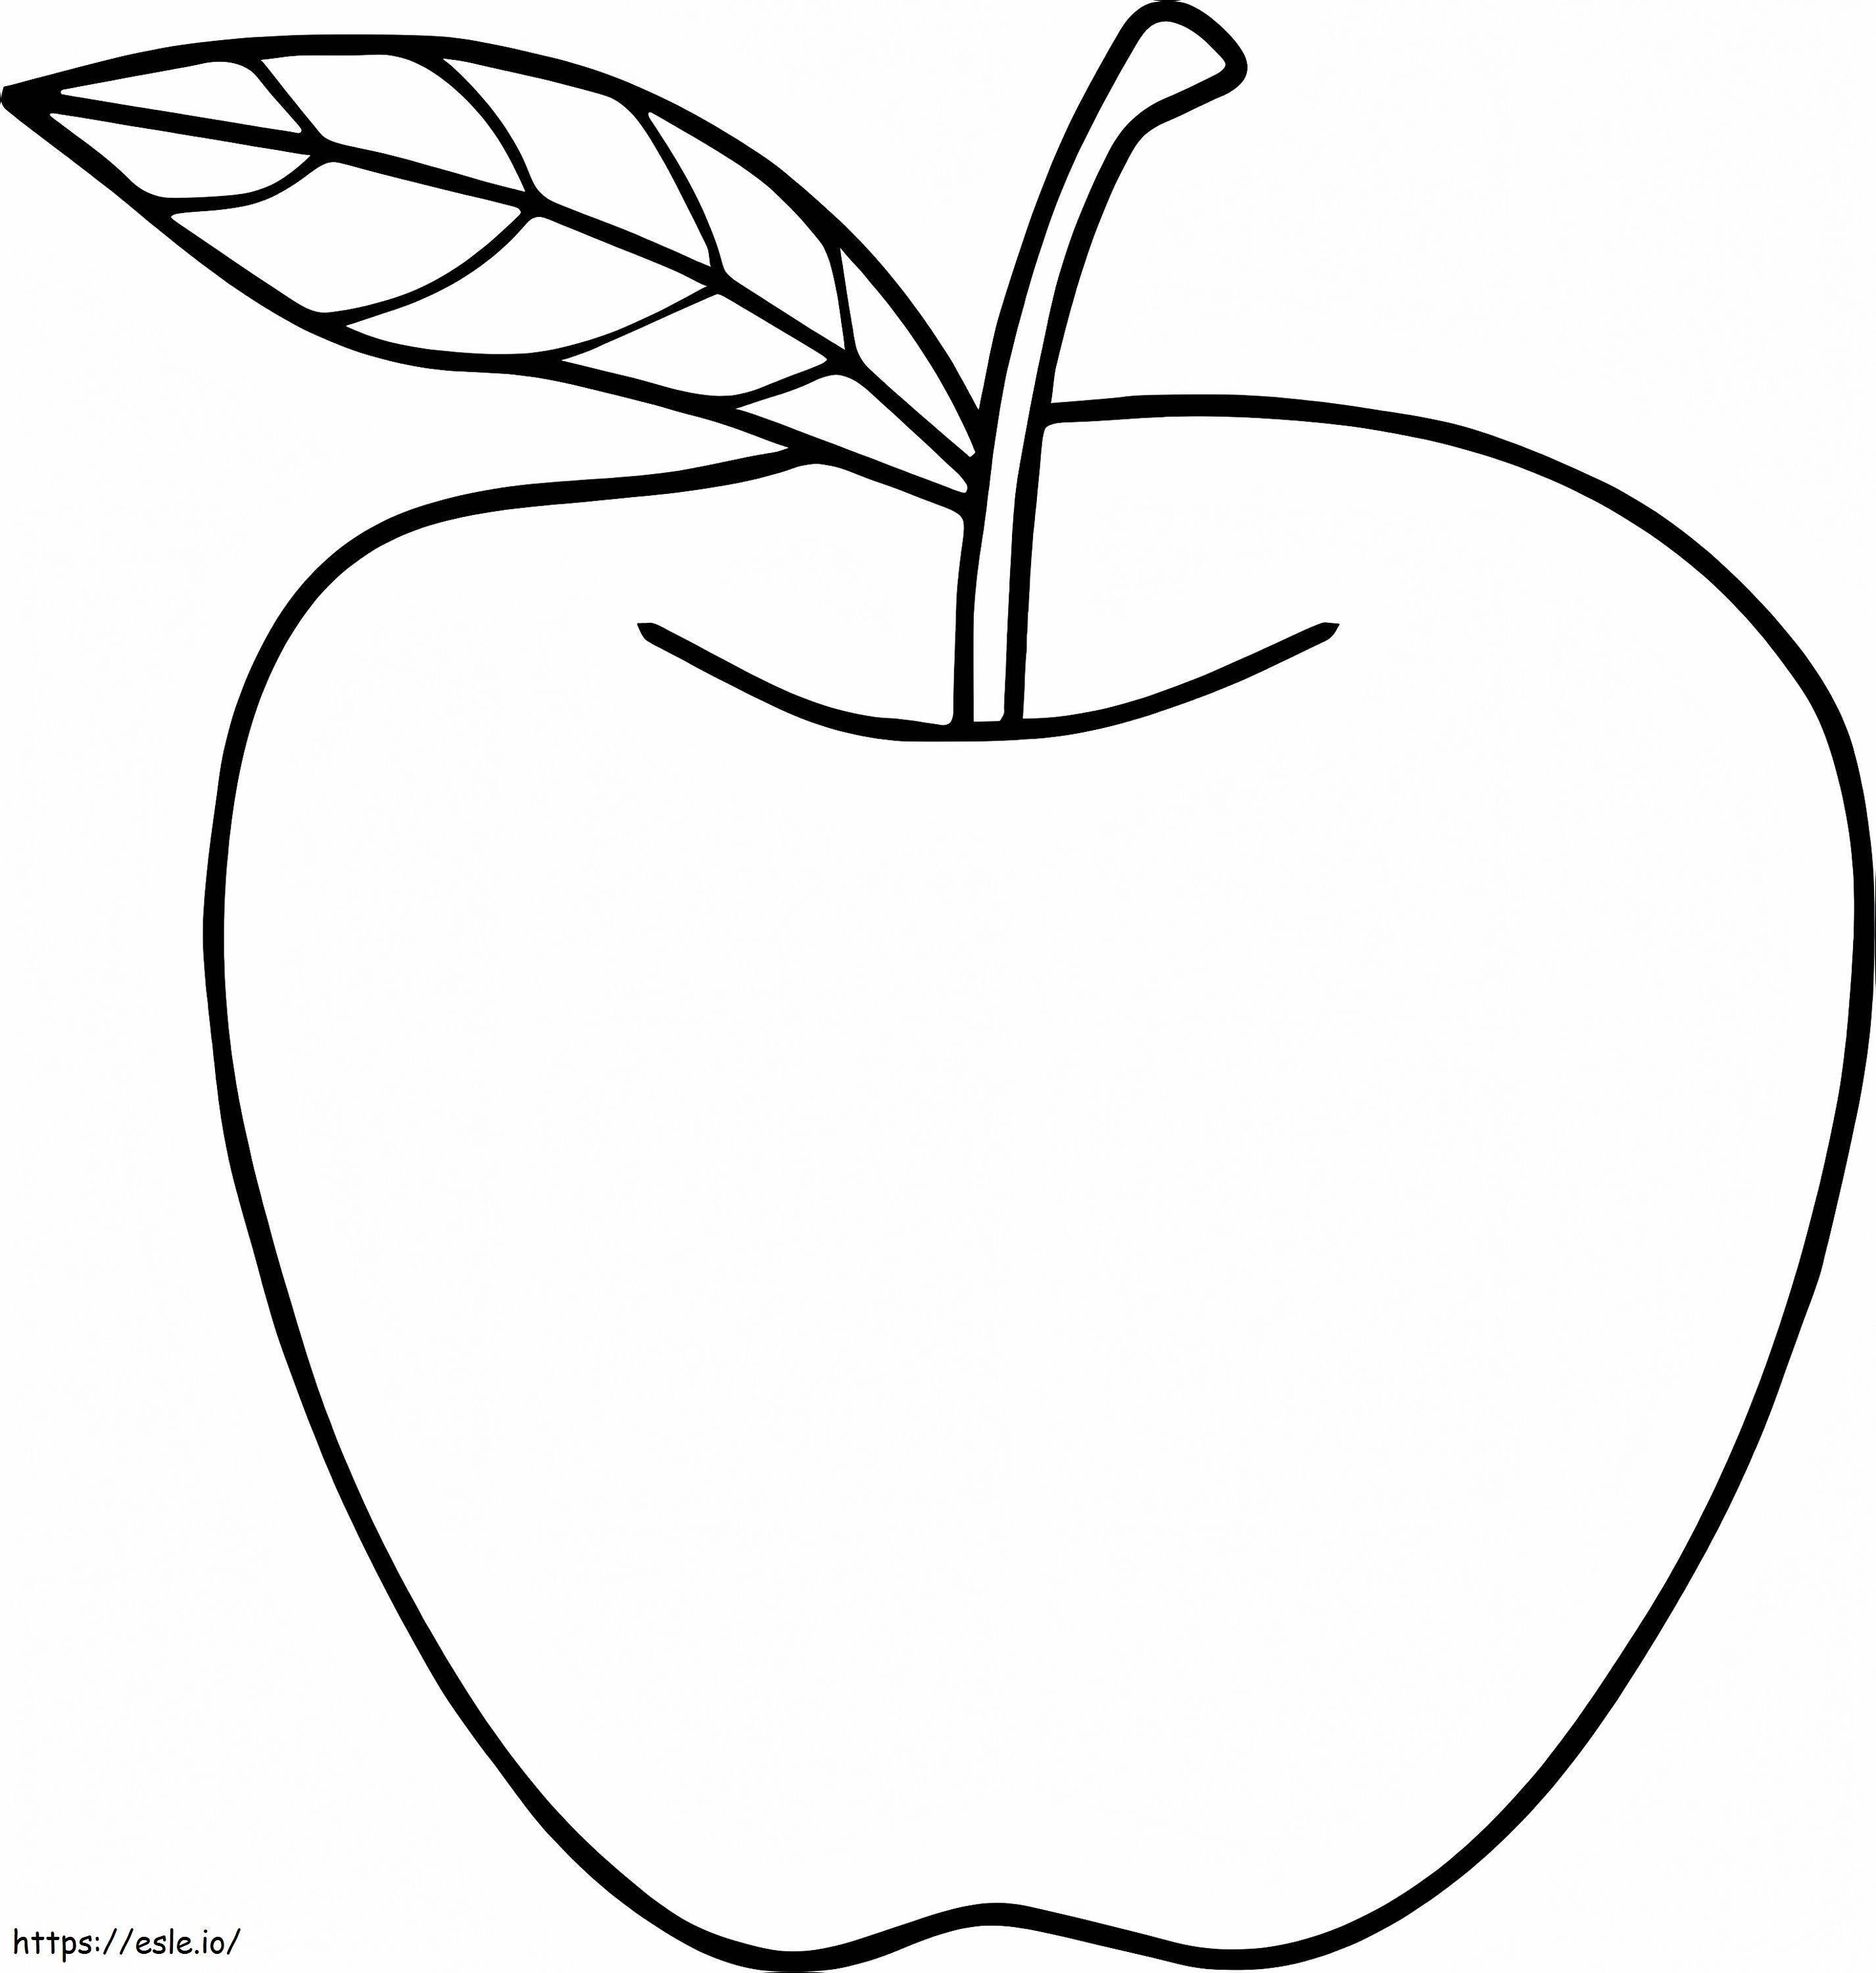 Apple Free Design coloring page